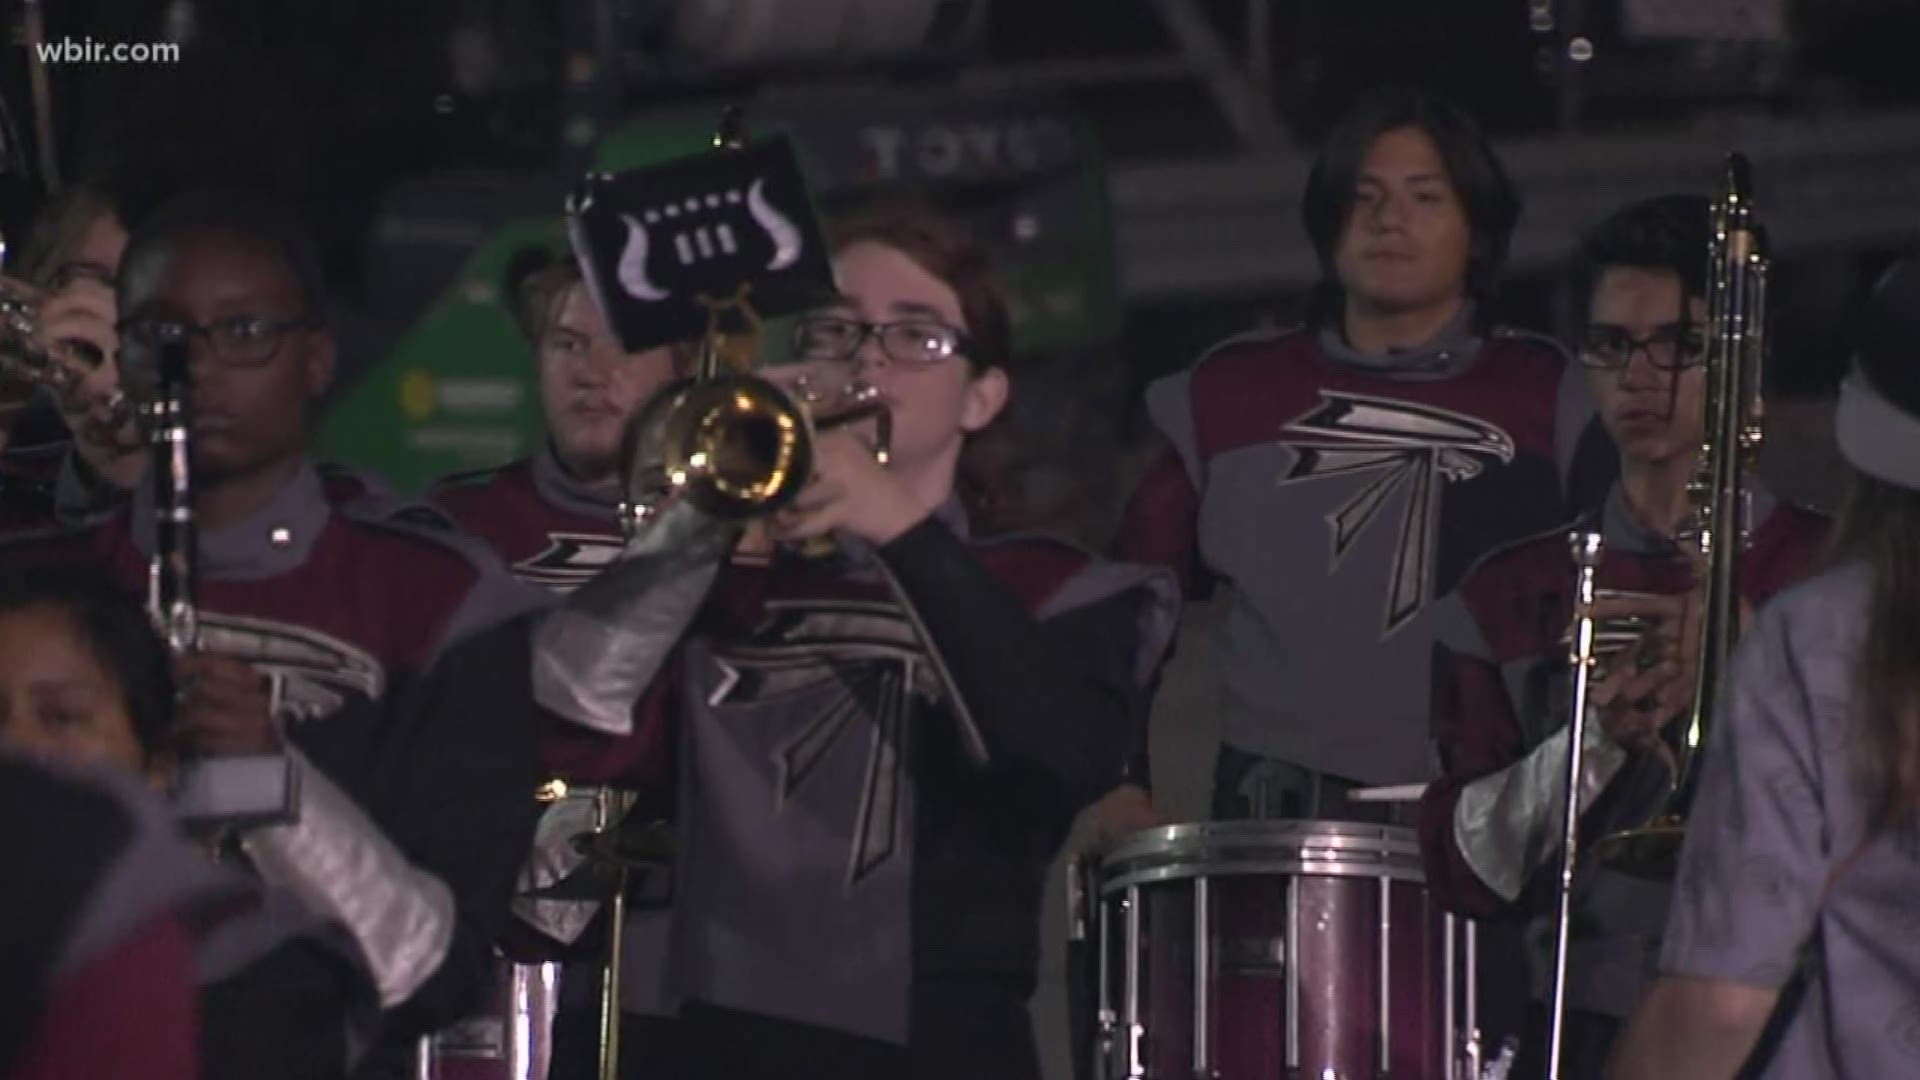 Fulton is our week 7 Band of the Week.